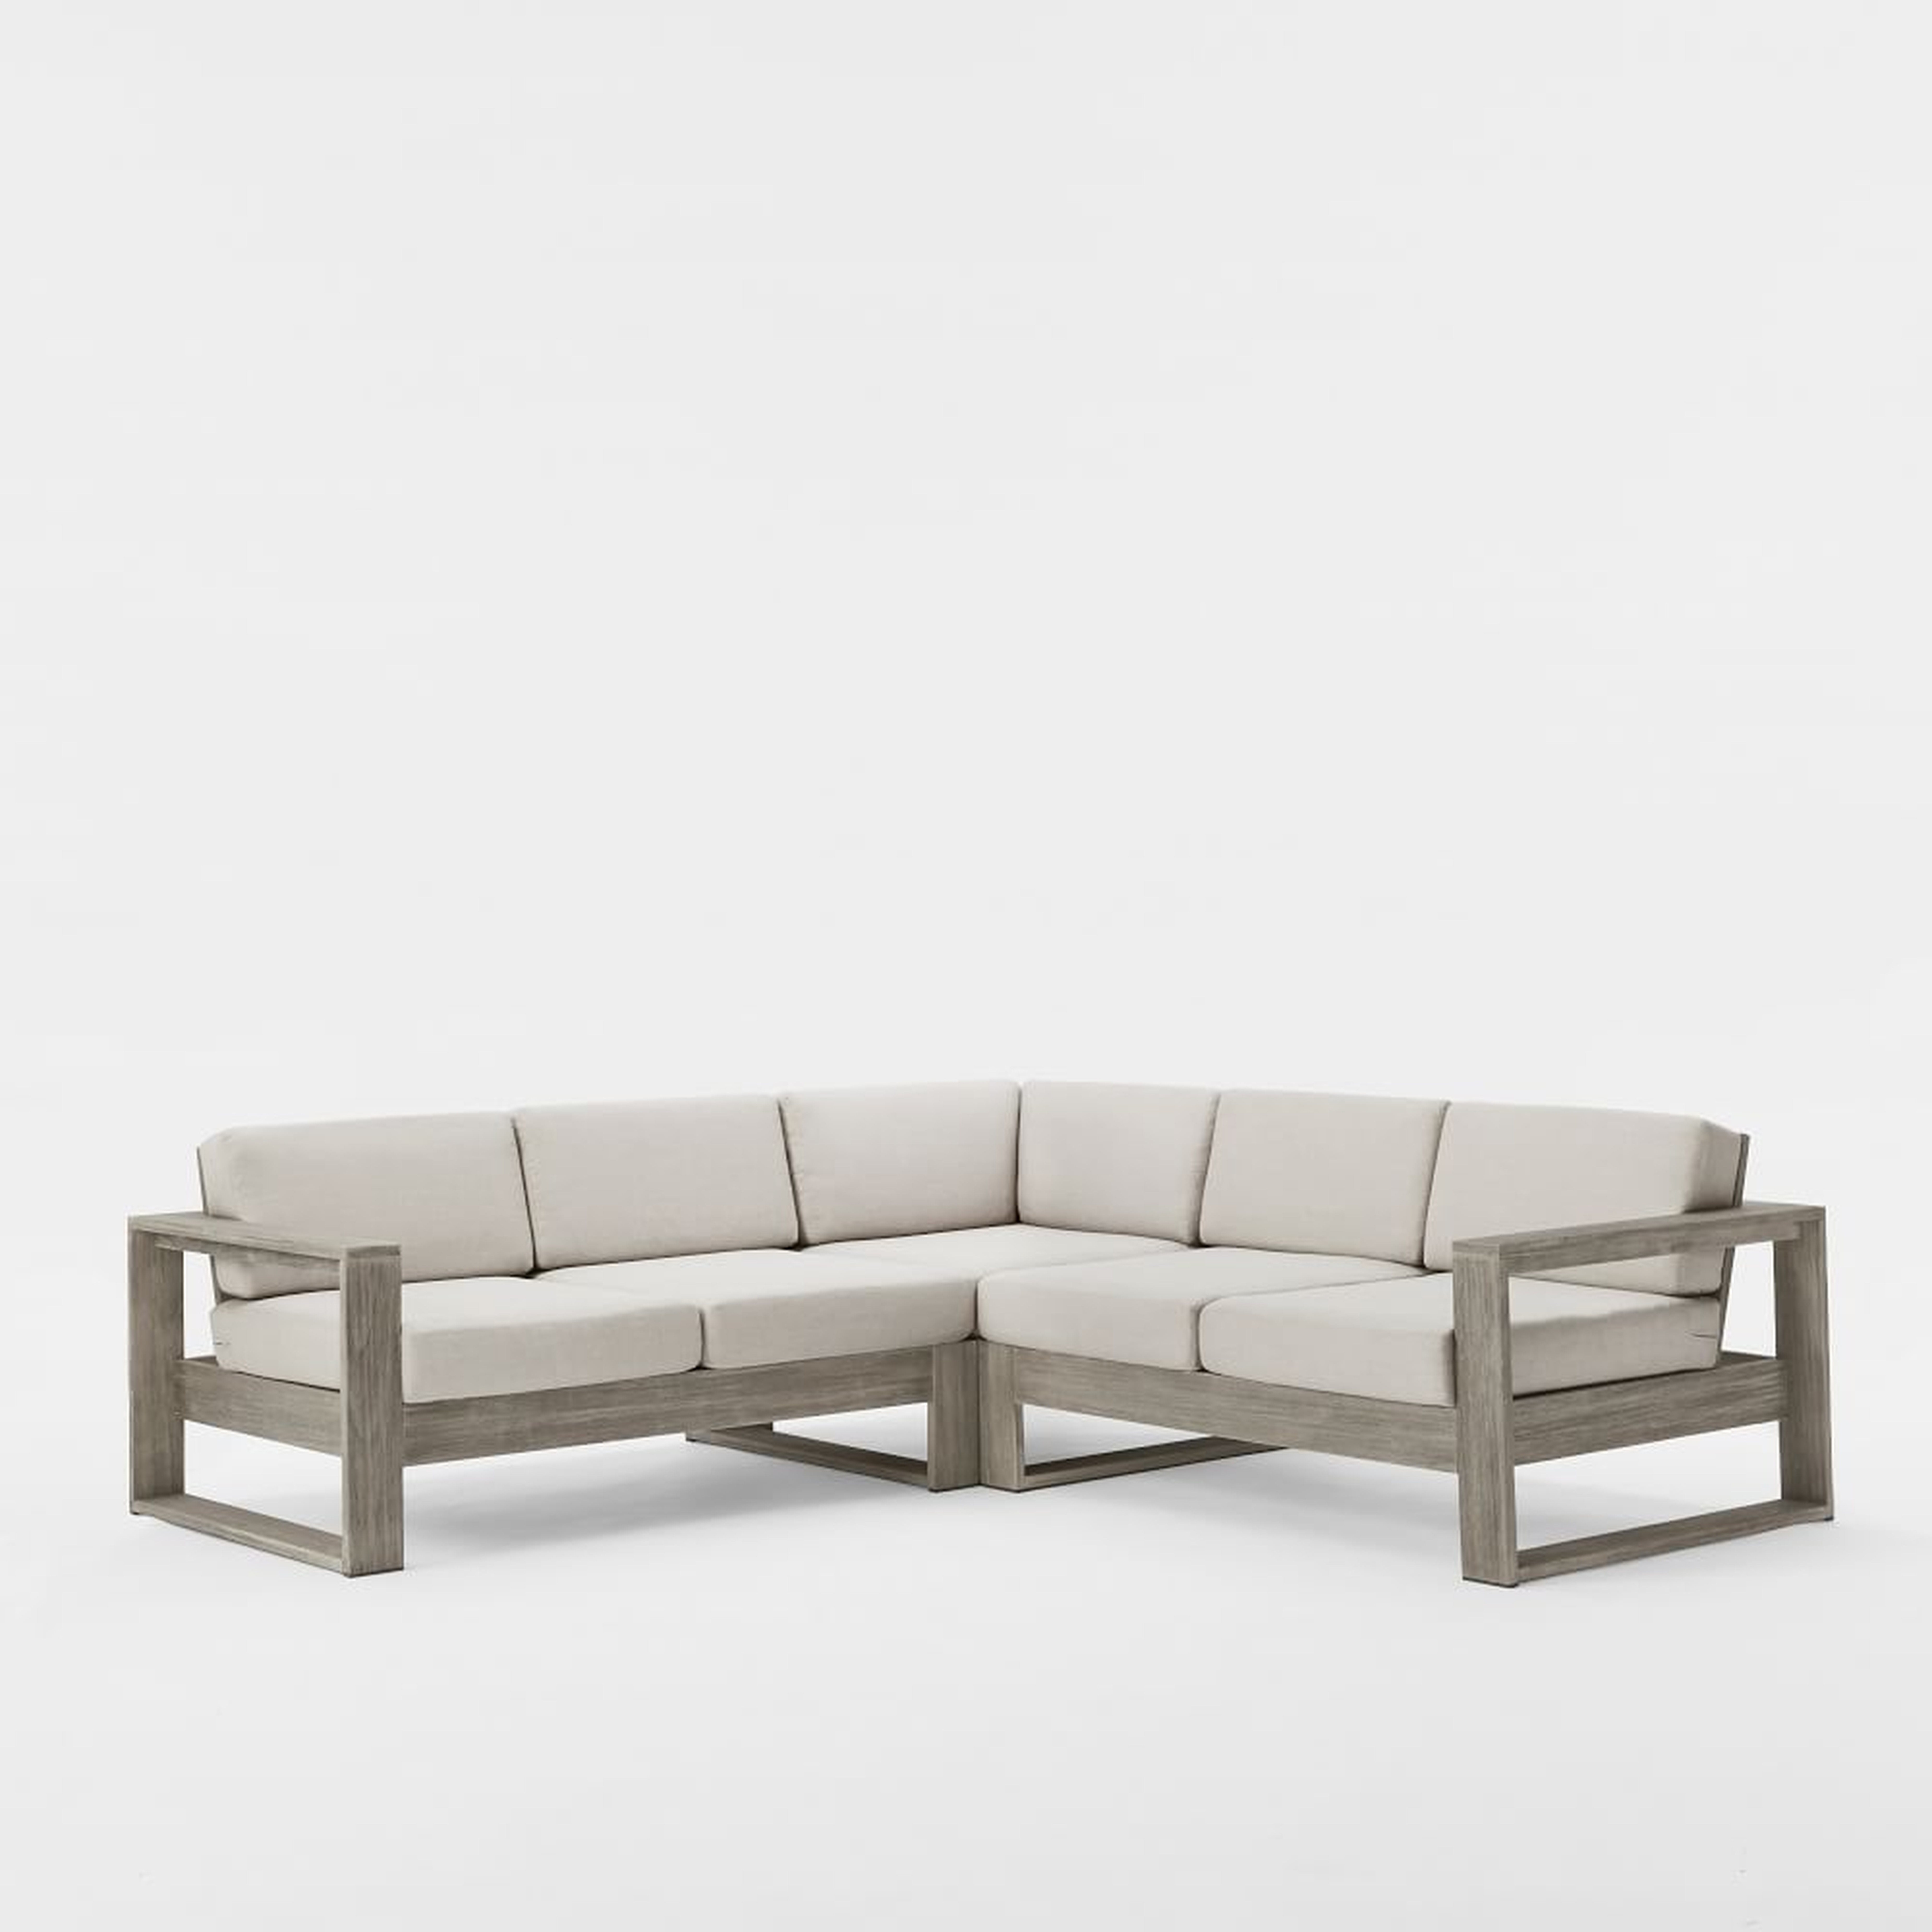 Portside Set 3: Weathered Gray L-Shaped 3 Piece Sectional - West Elm